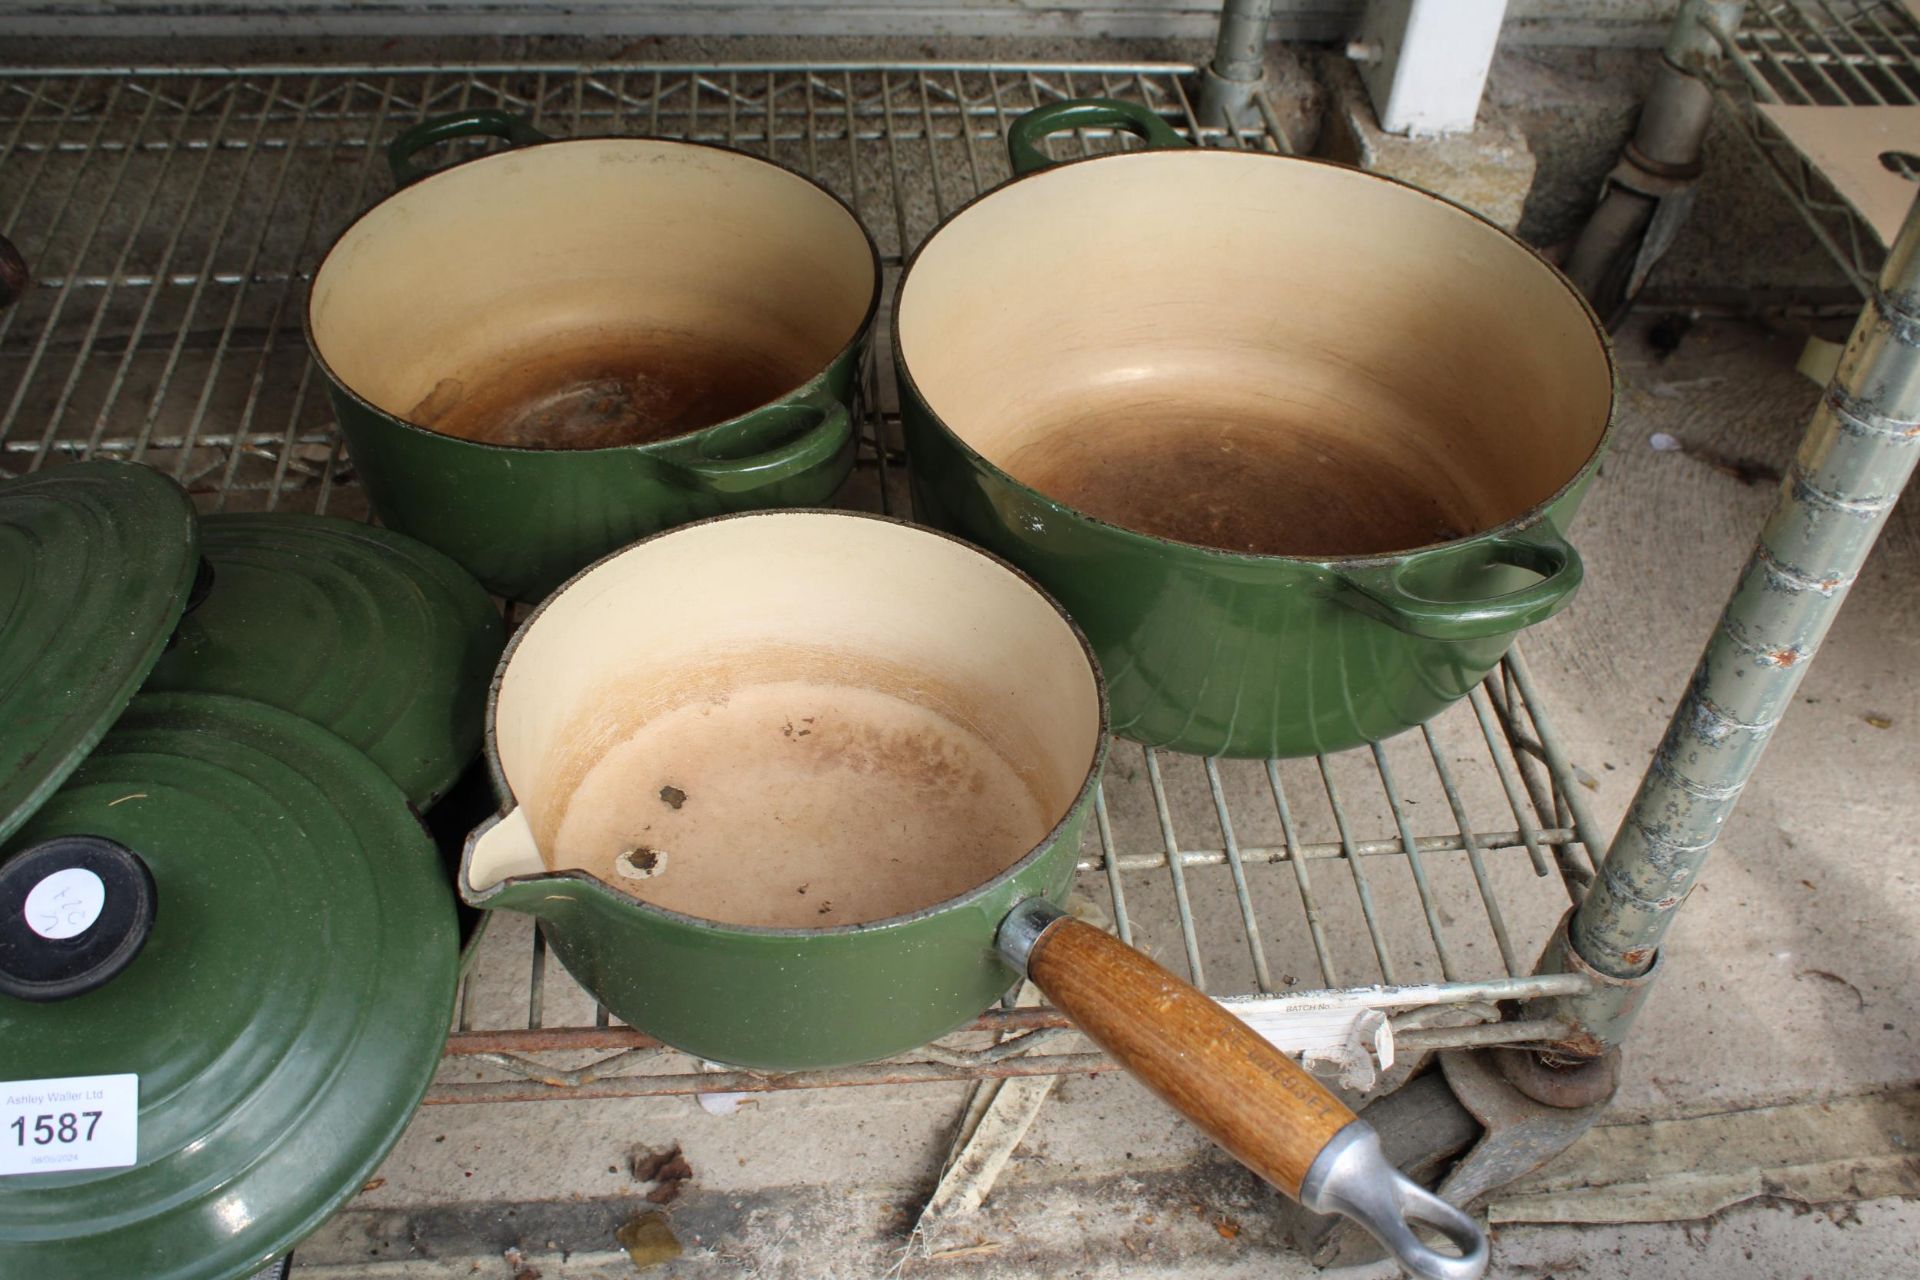 FOUR GREEN LE CREUSET PANS, ONE FRYING PAN AND THREE WITH LIDS - Image 2 of 4